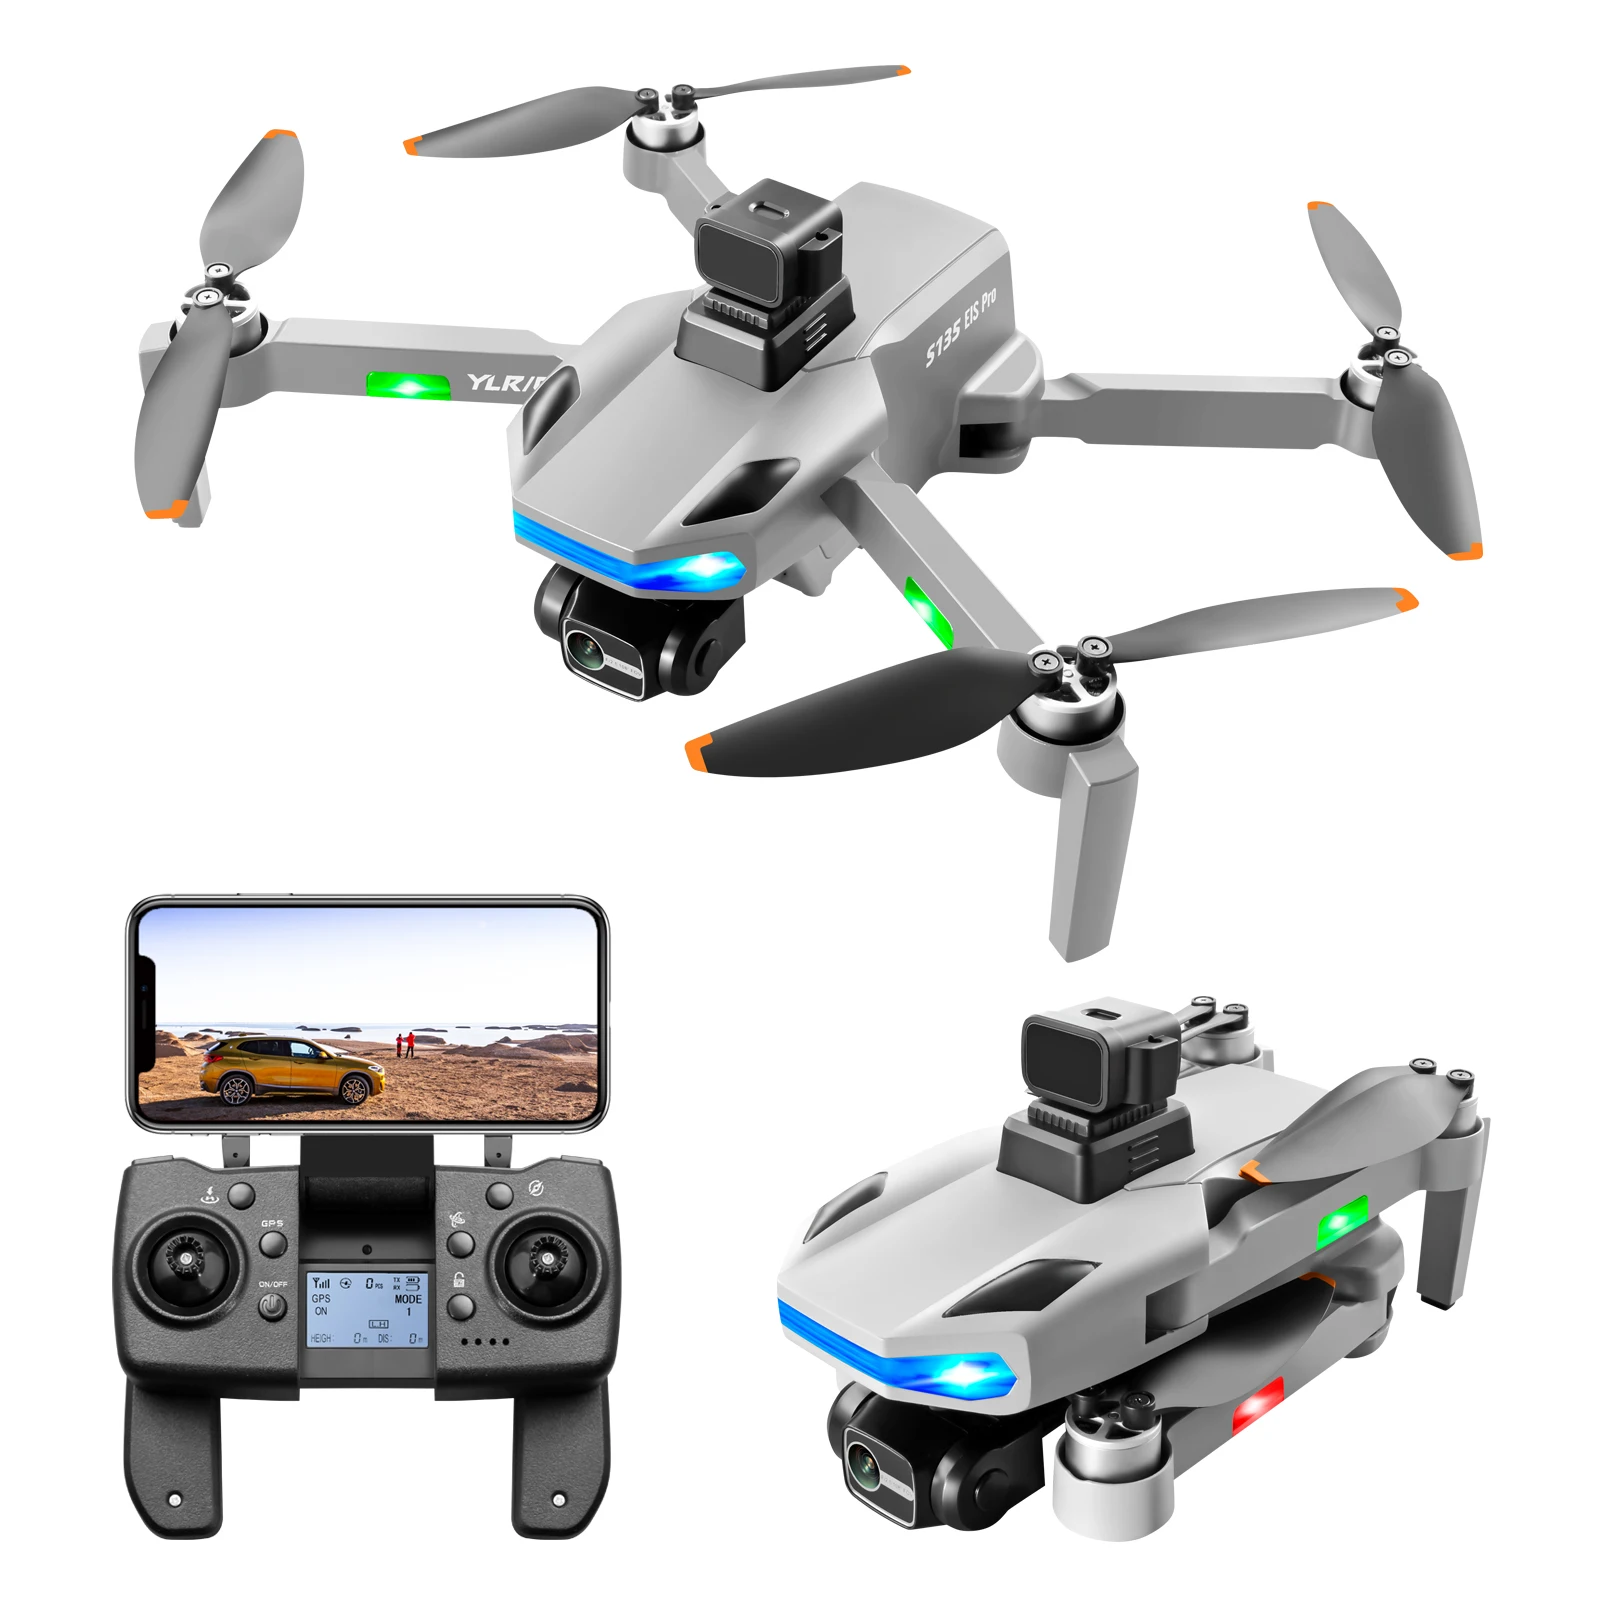 

KAI ONE MAX Drone 8K Camera 3-Axis Gimbal Anti-Shake Laser obstacle avoidance Brushless Foldable Quadcopter